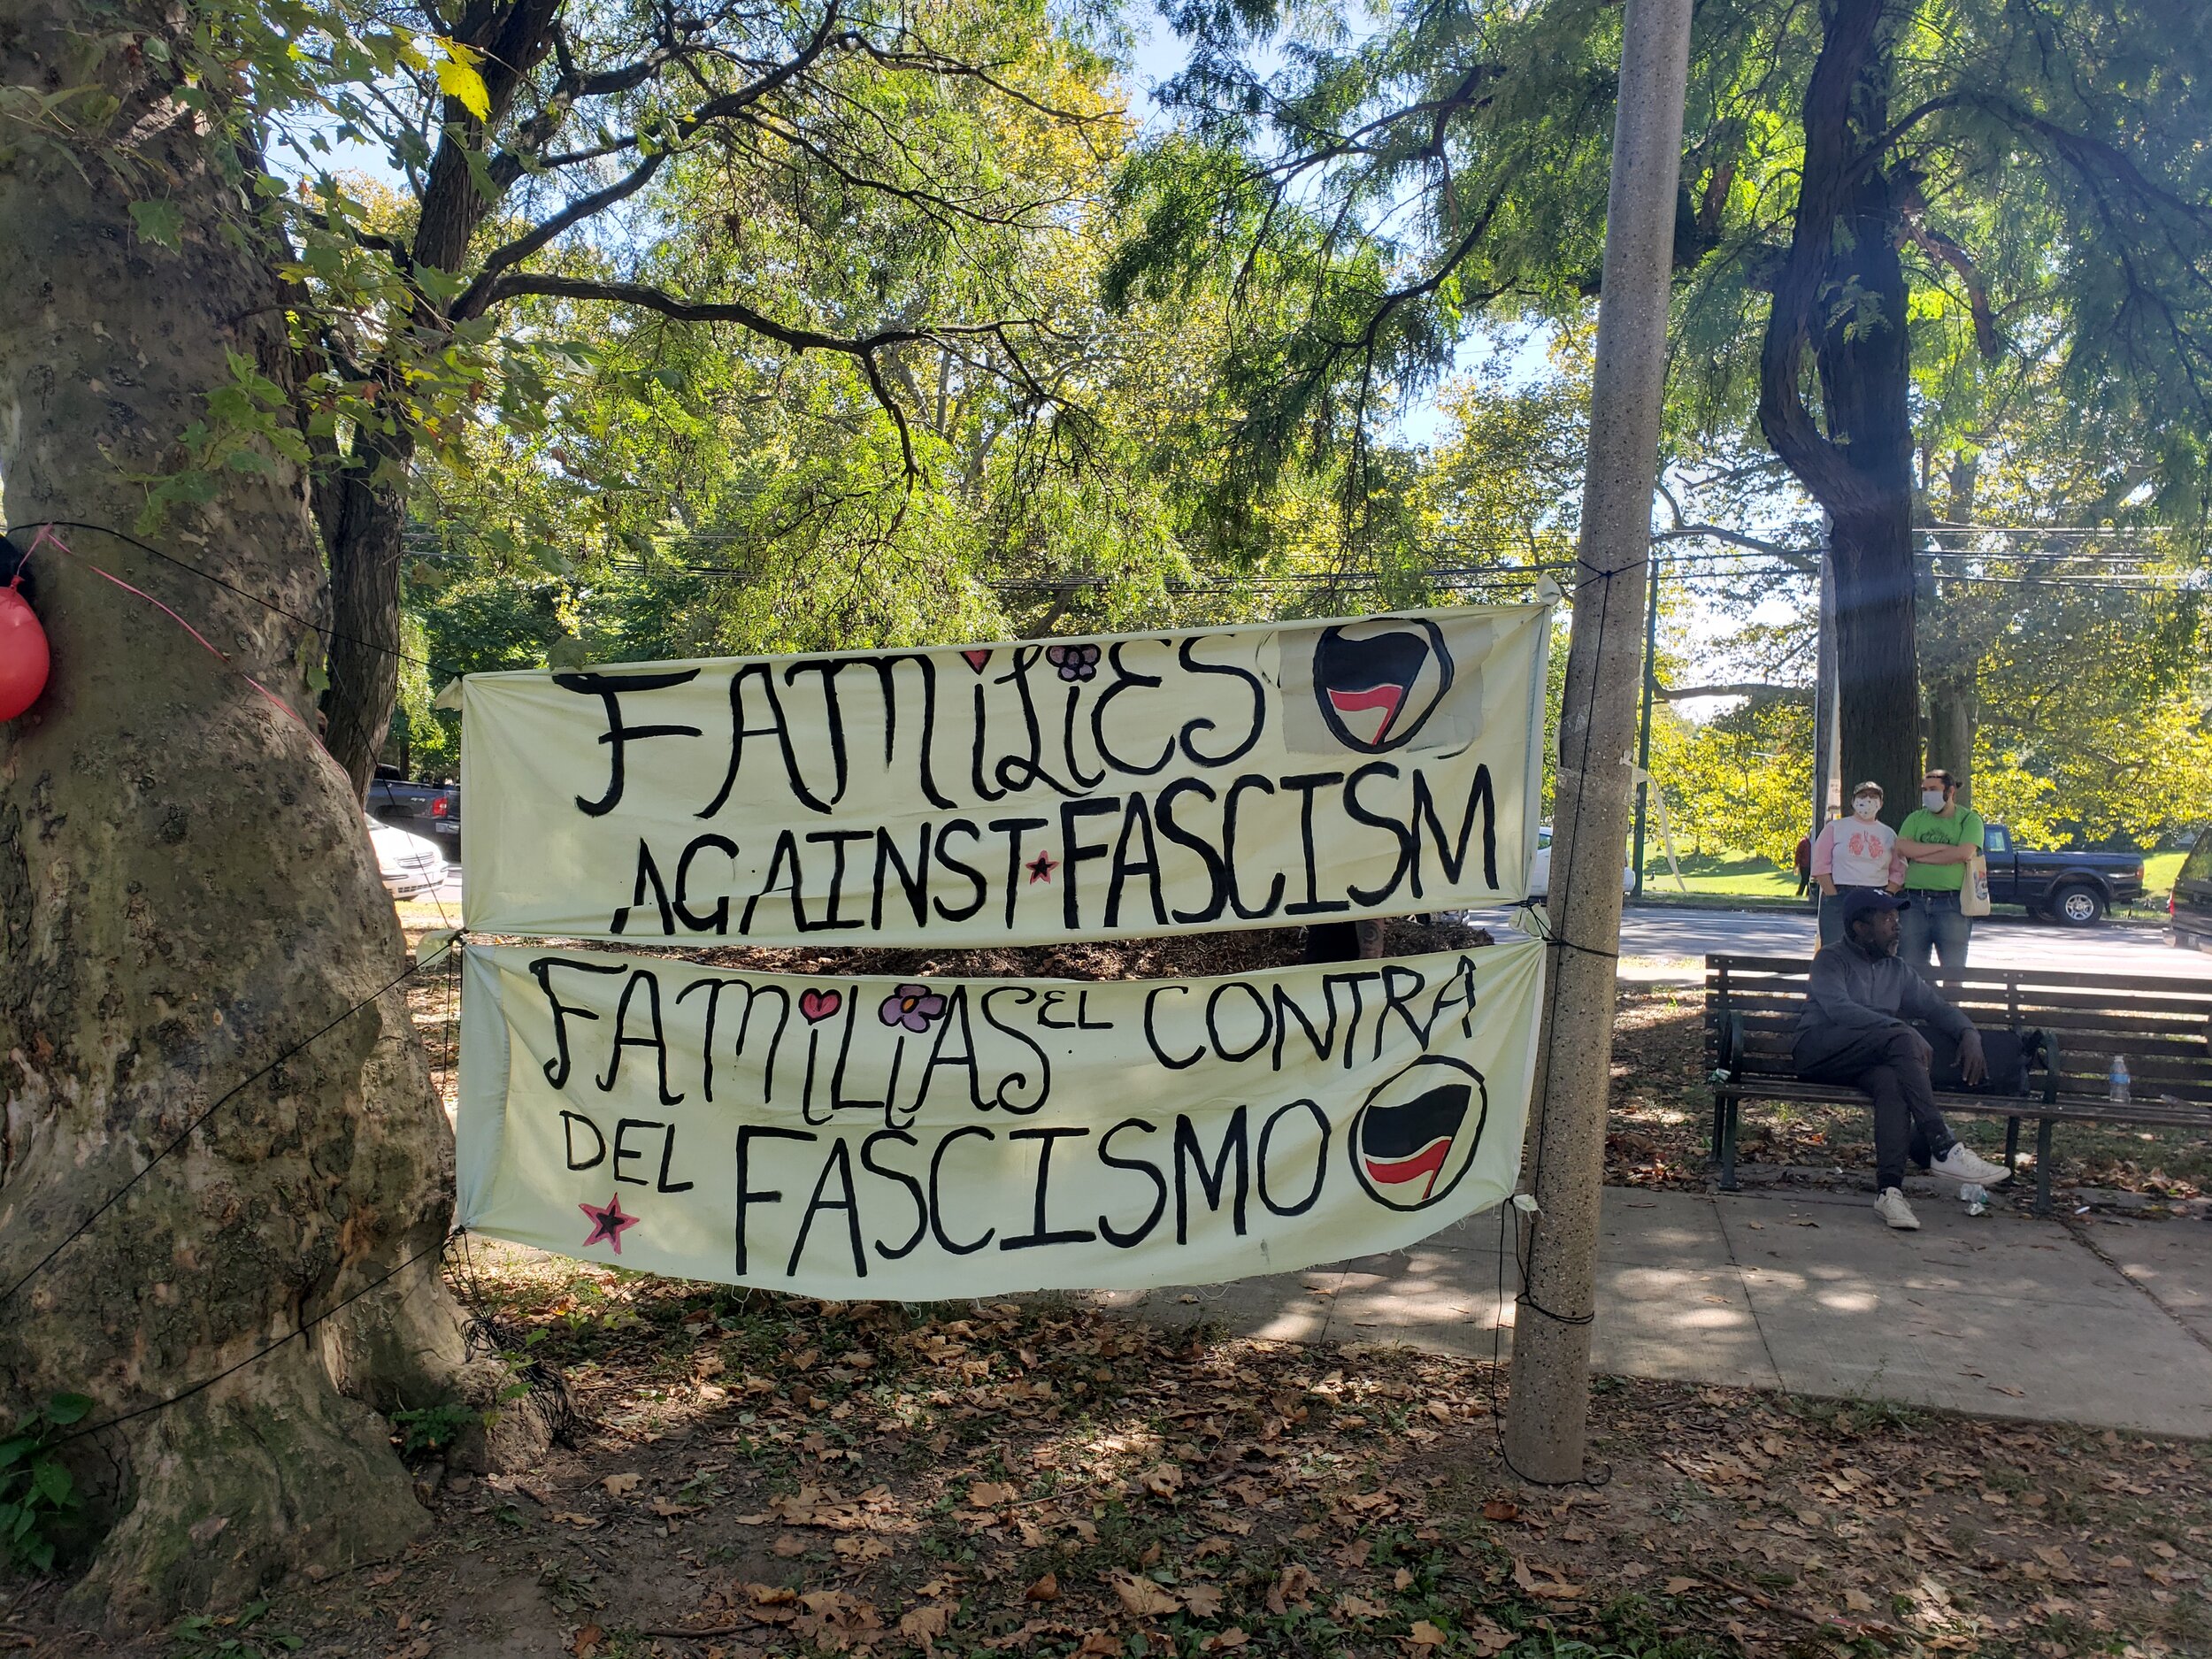 Families against fascism Signs in Clark Park for the vigil on Saturday. Photographs by Grid staff.